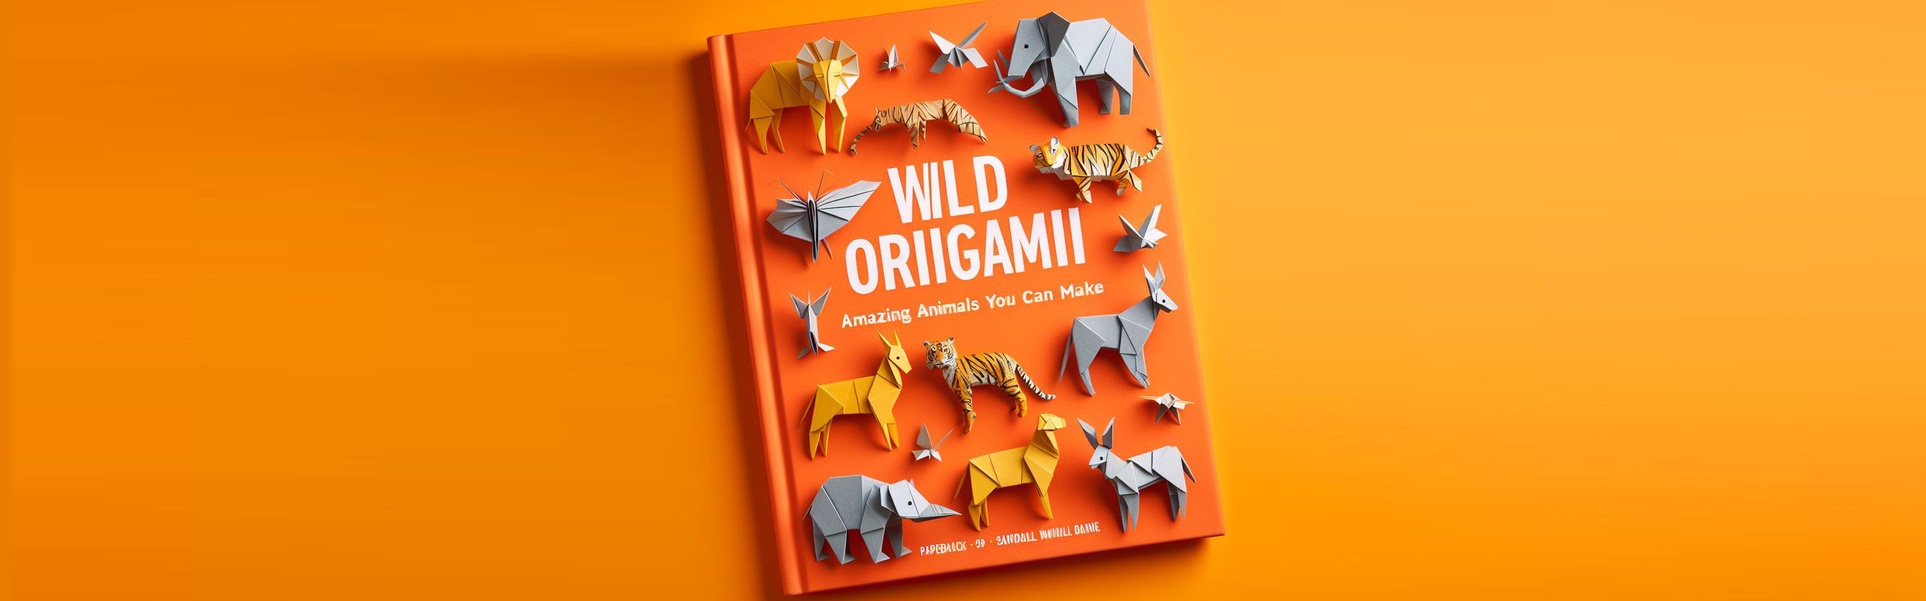 Wild Origami: Amazing Animals You Can Make Paperback